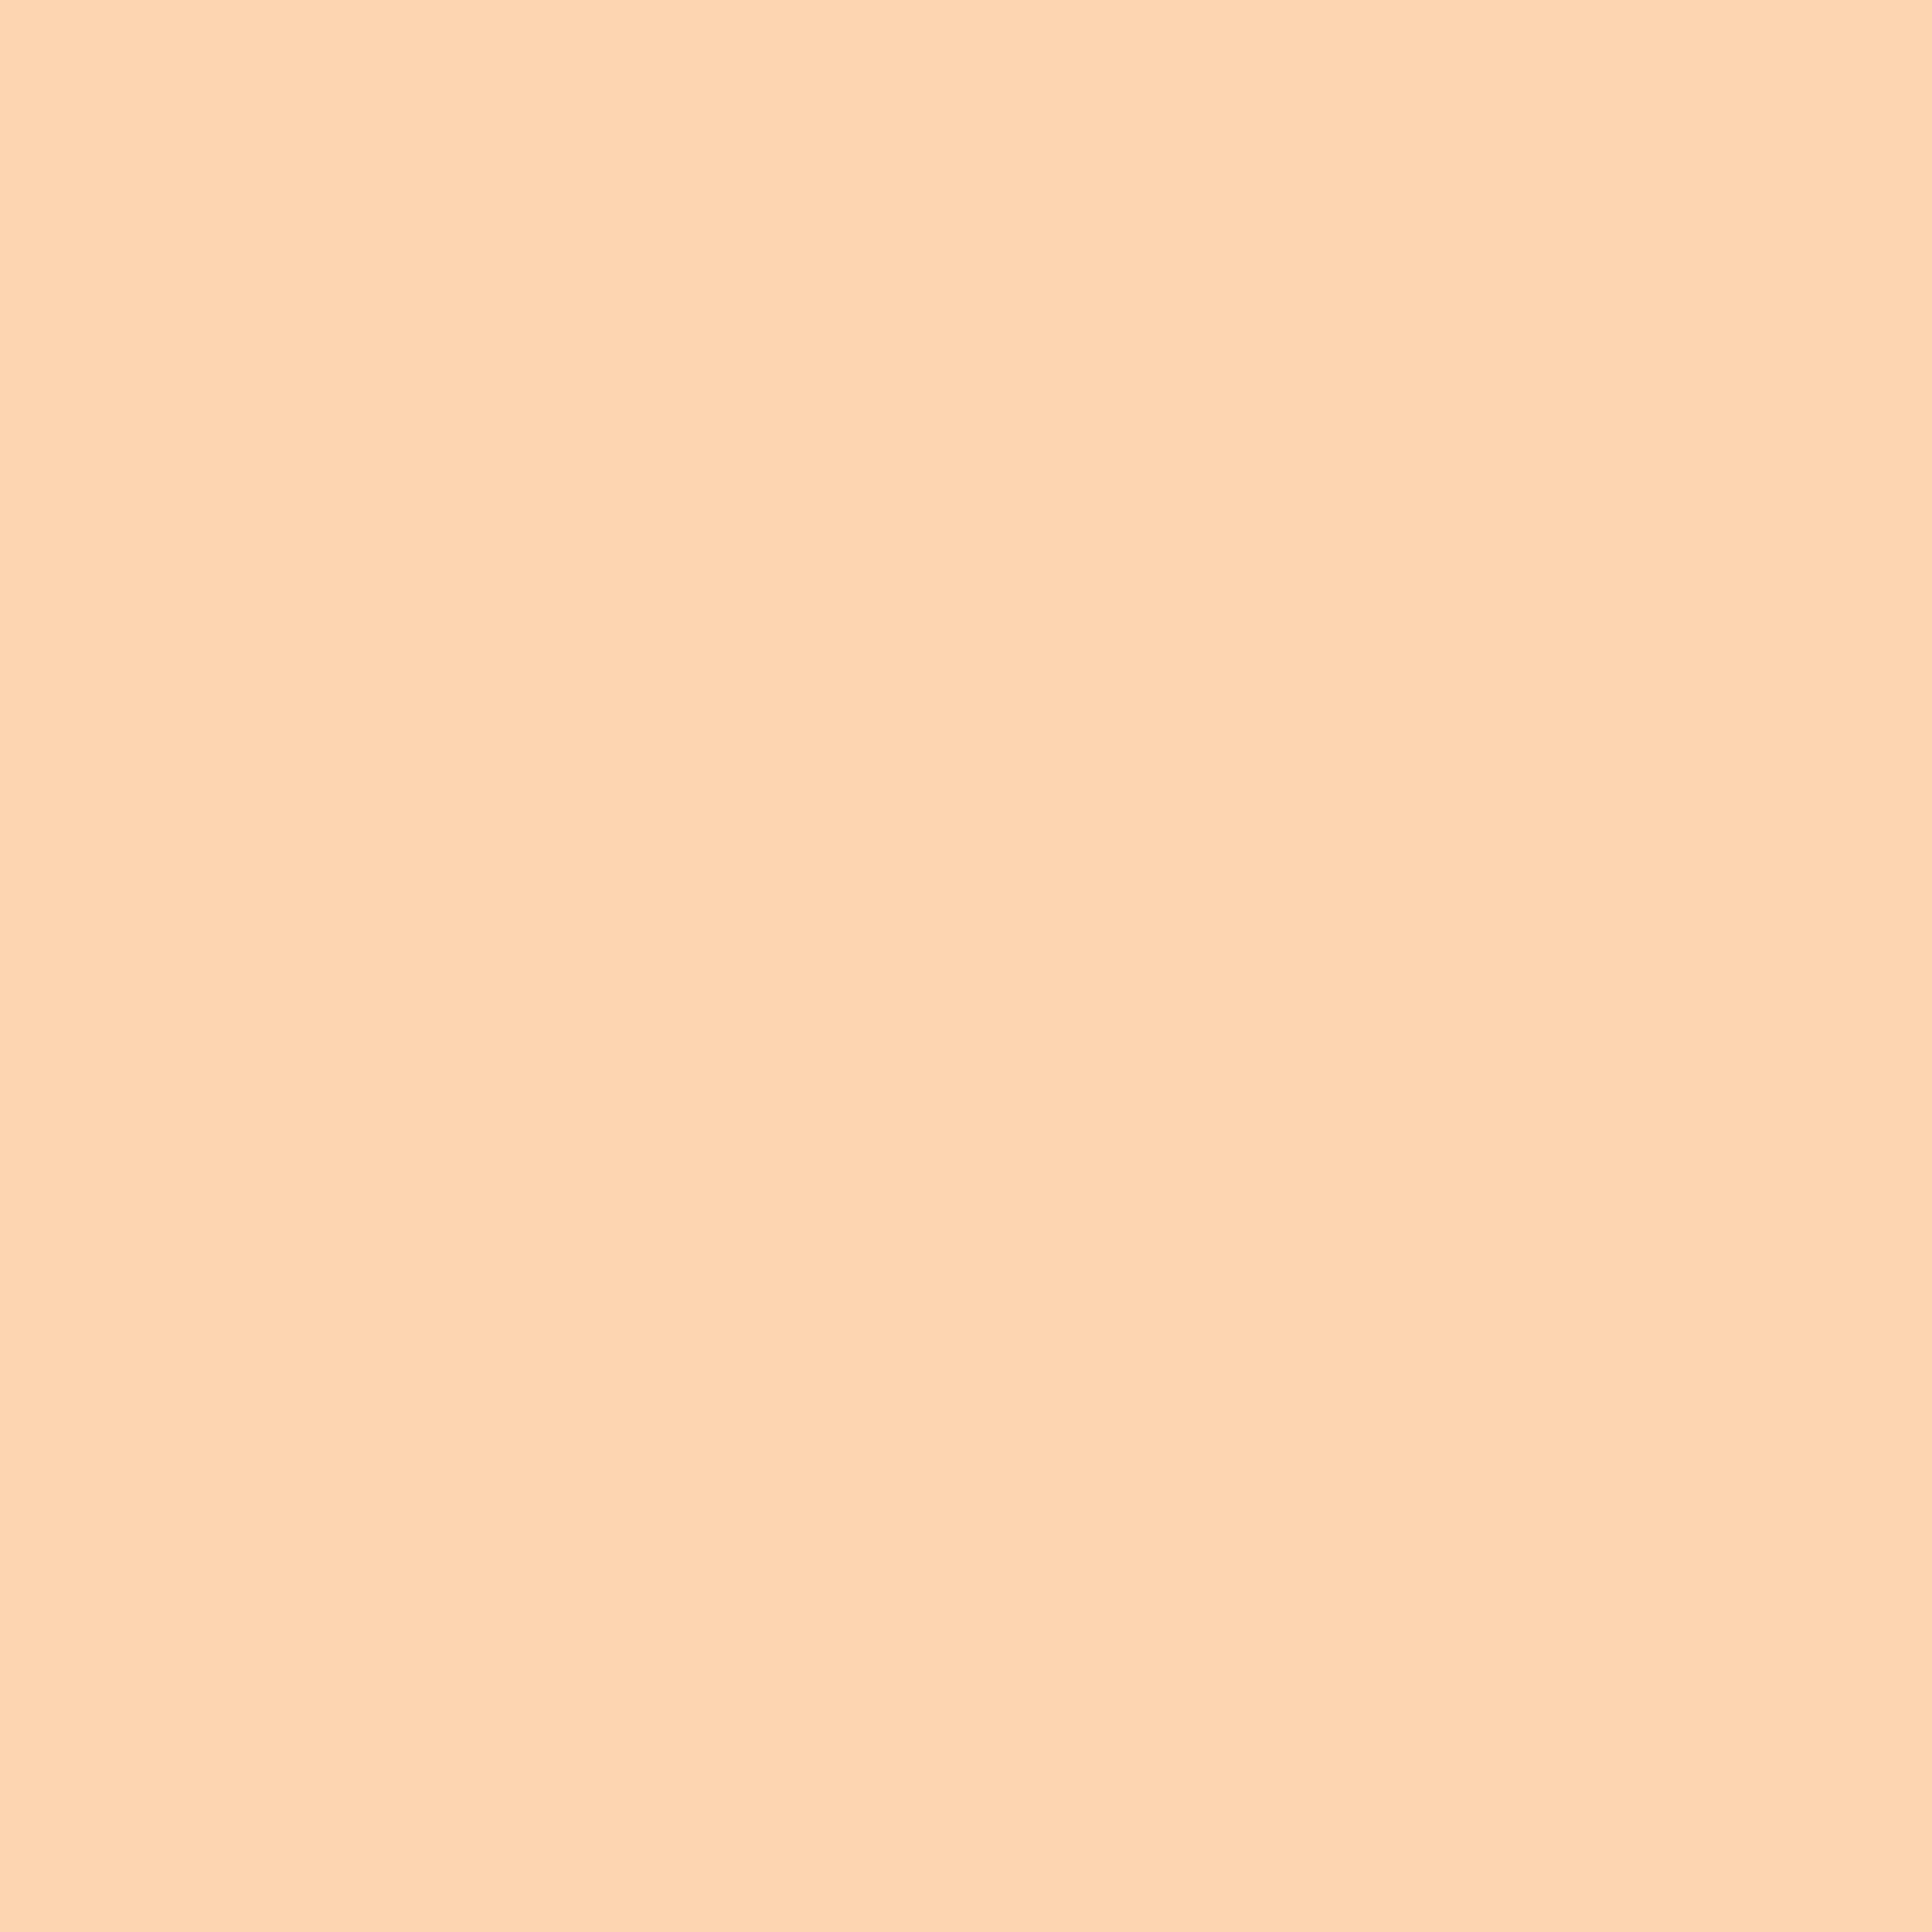 3600x3600 Light Apricot Solid Color Background